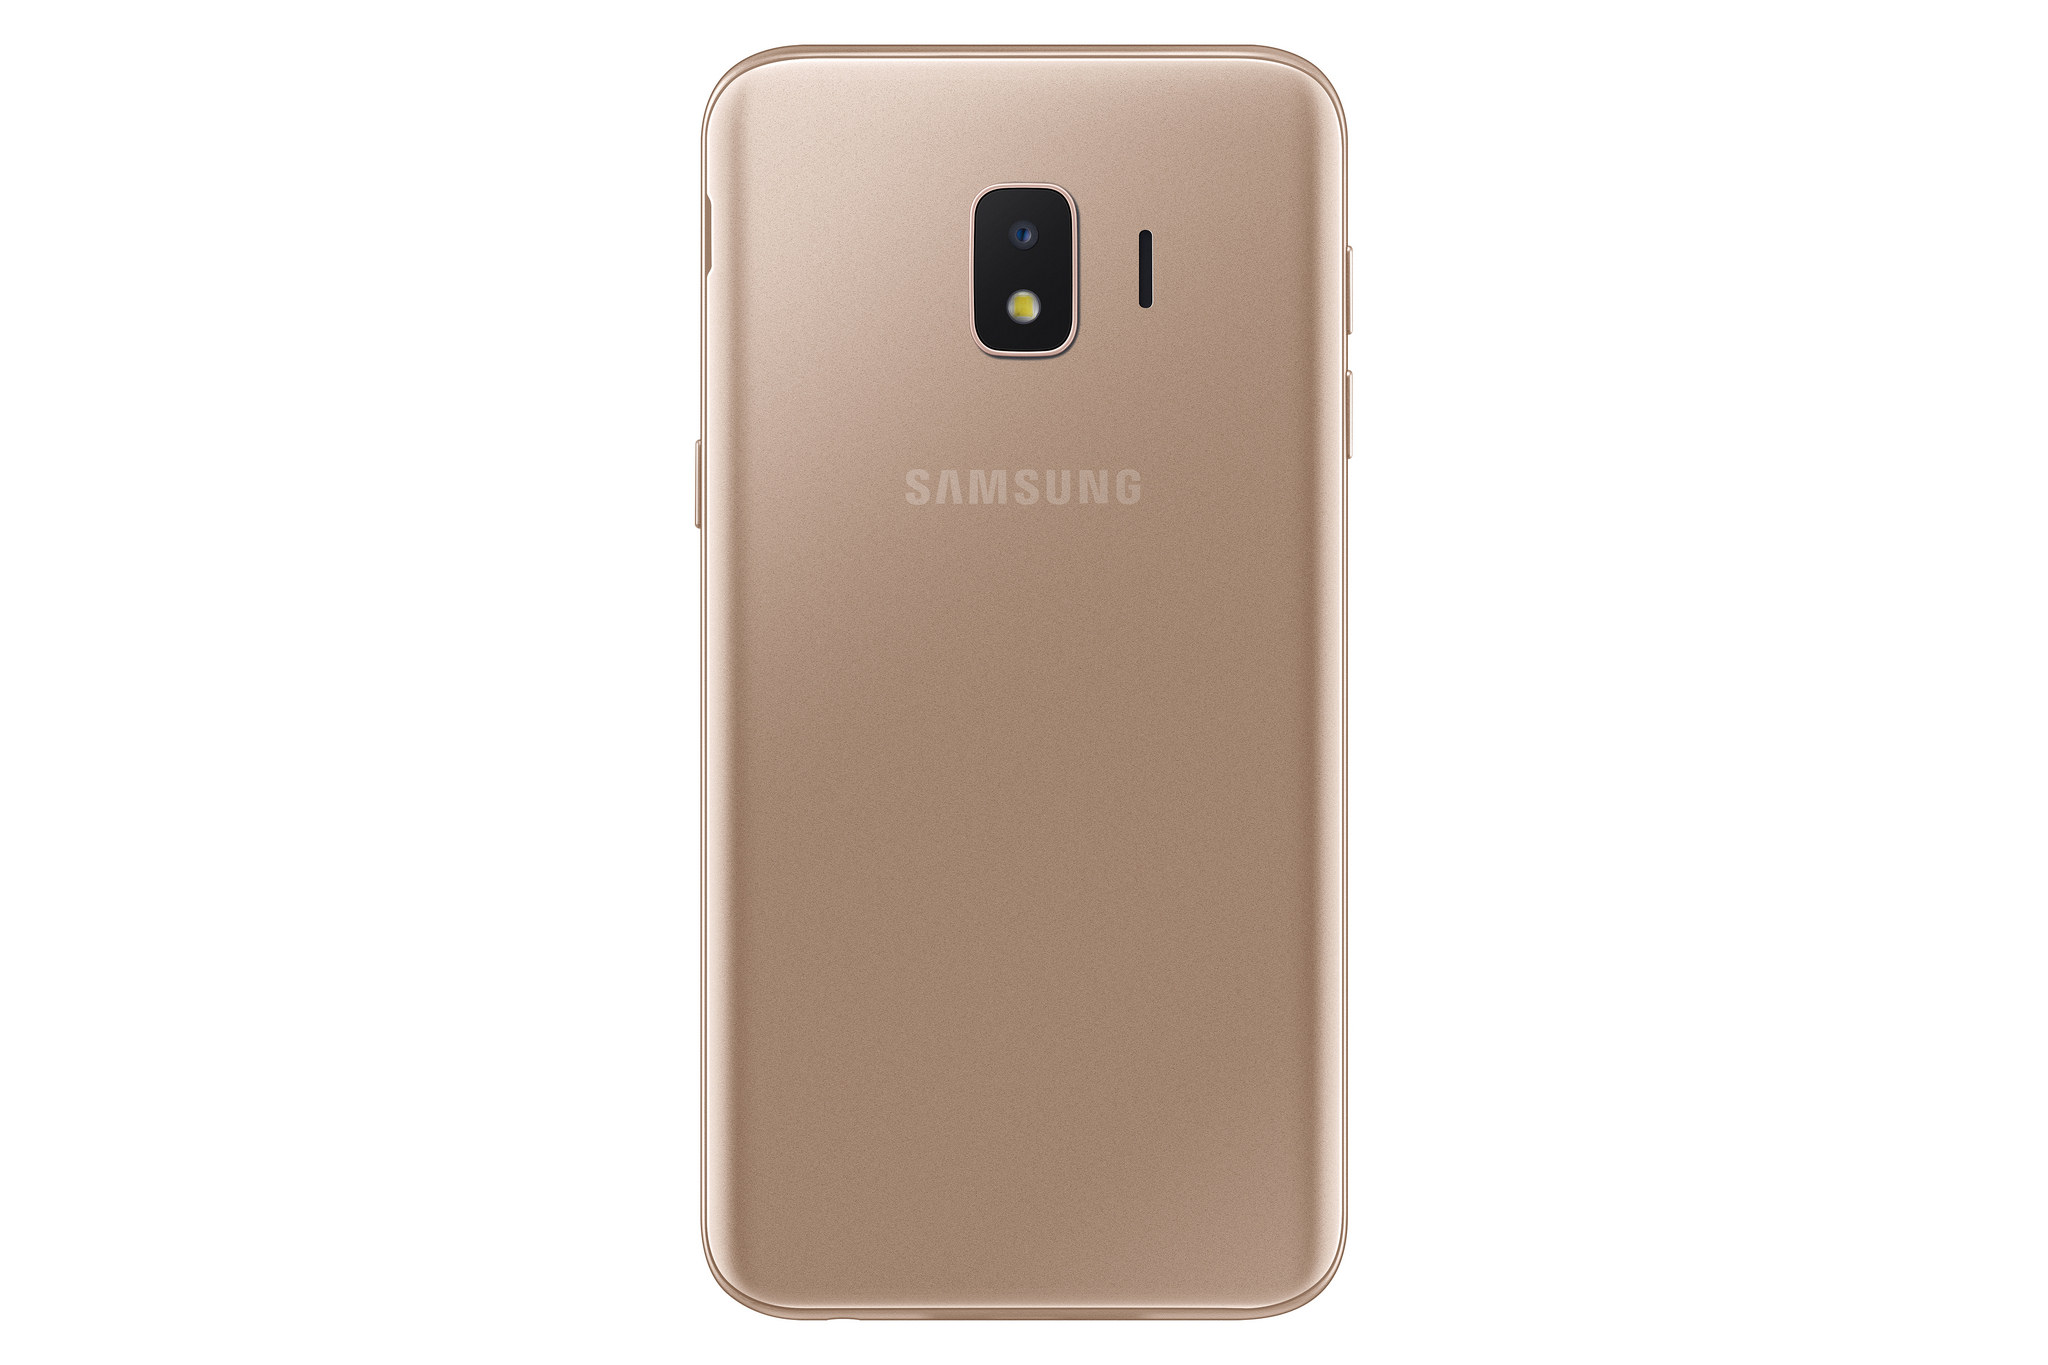 Galaxy J2 Core unveiled as Samsung’s first Android Go smartphone